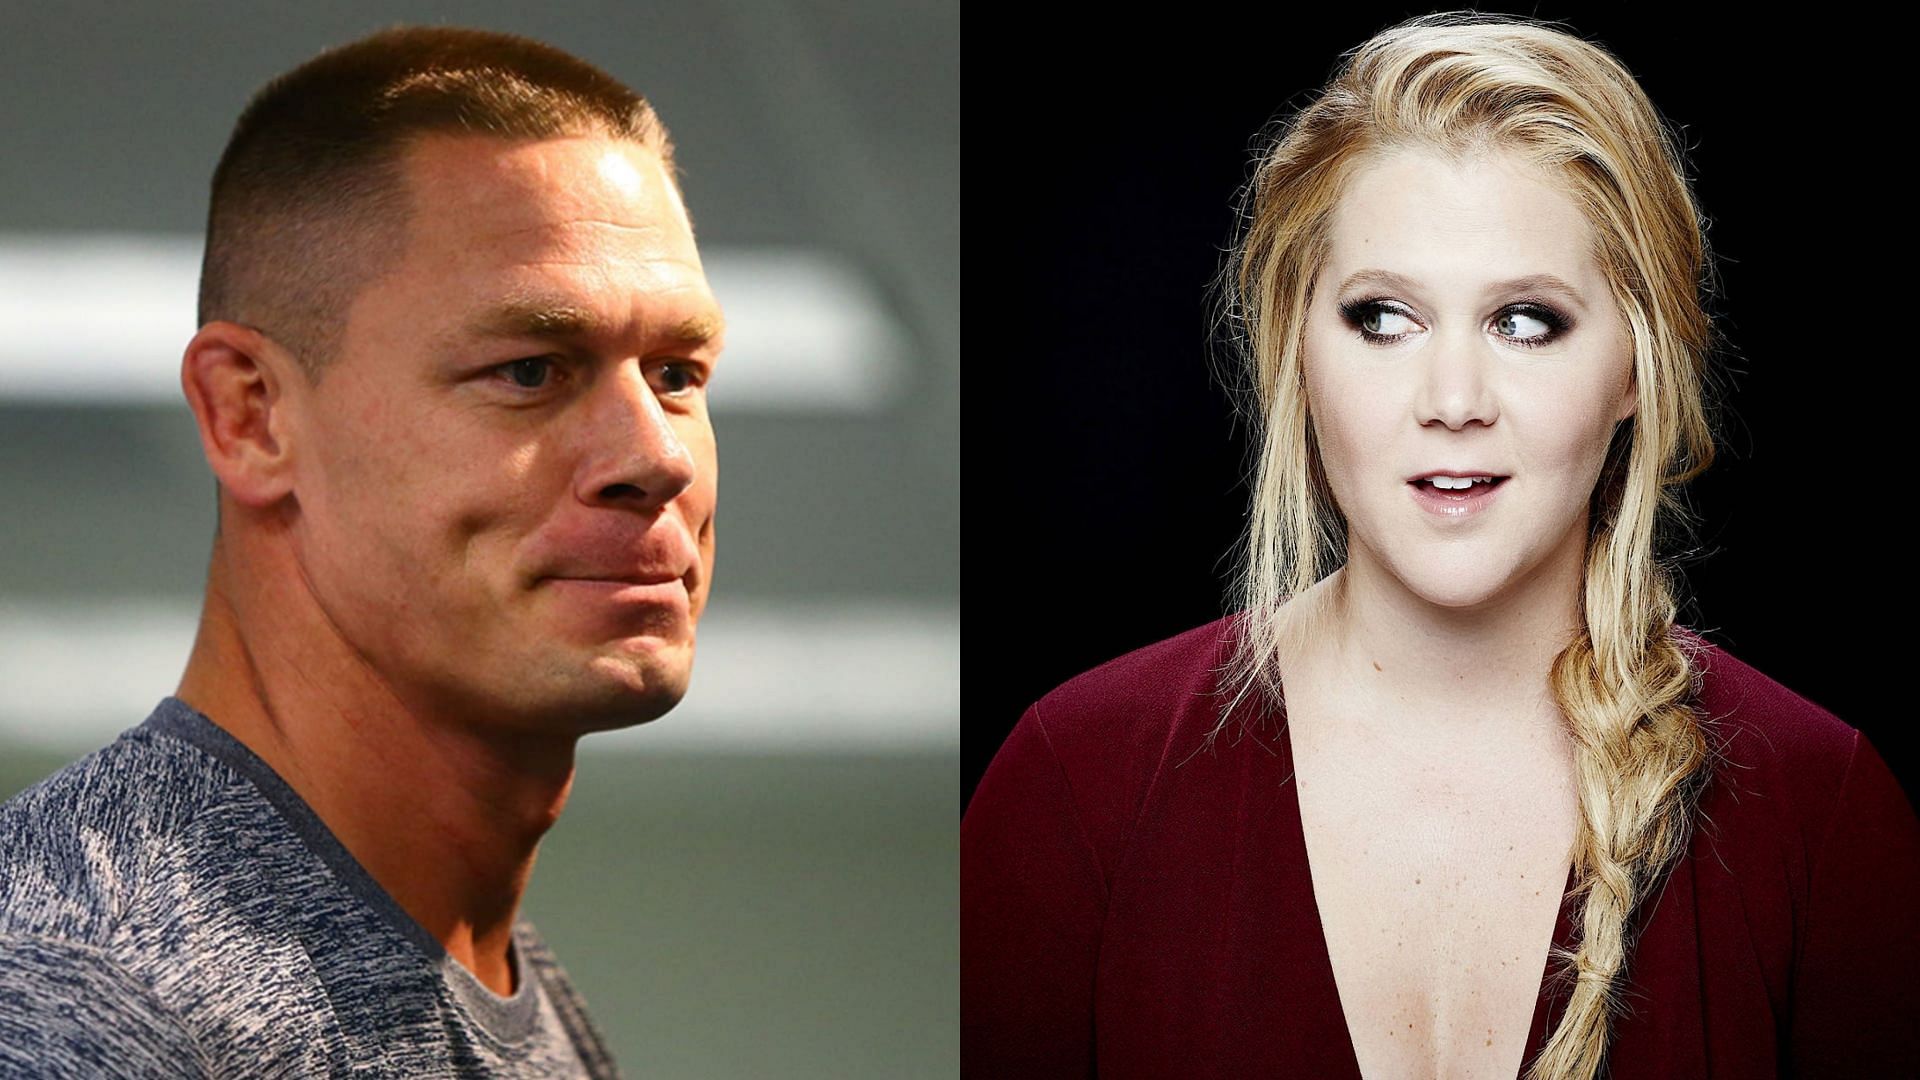 WWE legend John Cena (left) and Amy Schumer (right)